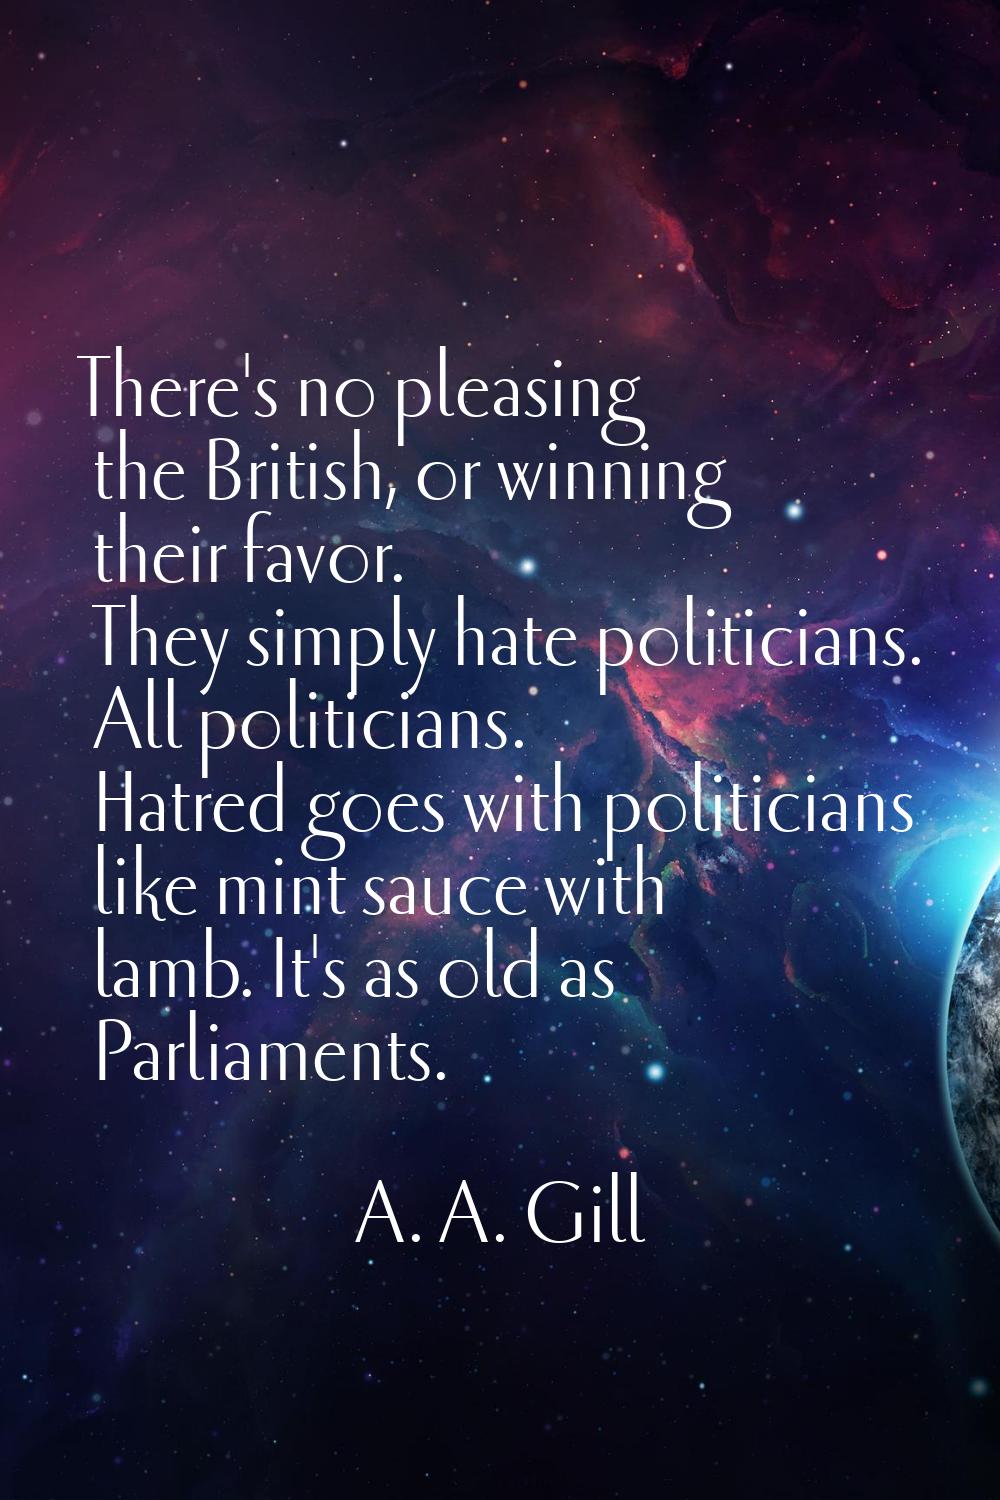 There's no pleasing the British, or winning their favor. They simply hate politicians. All politici